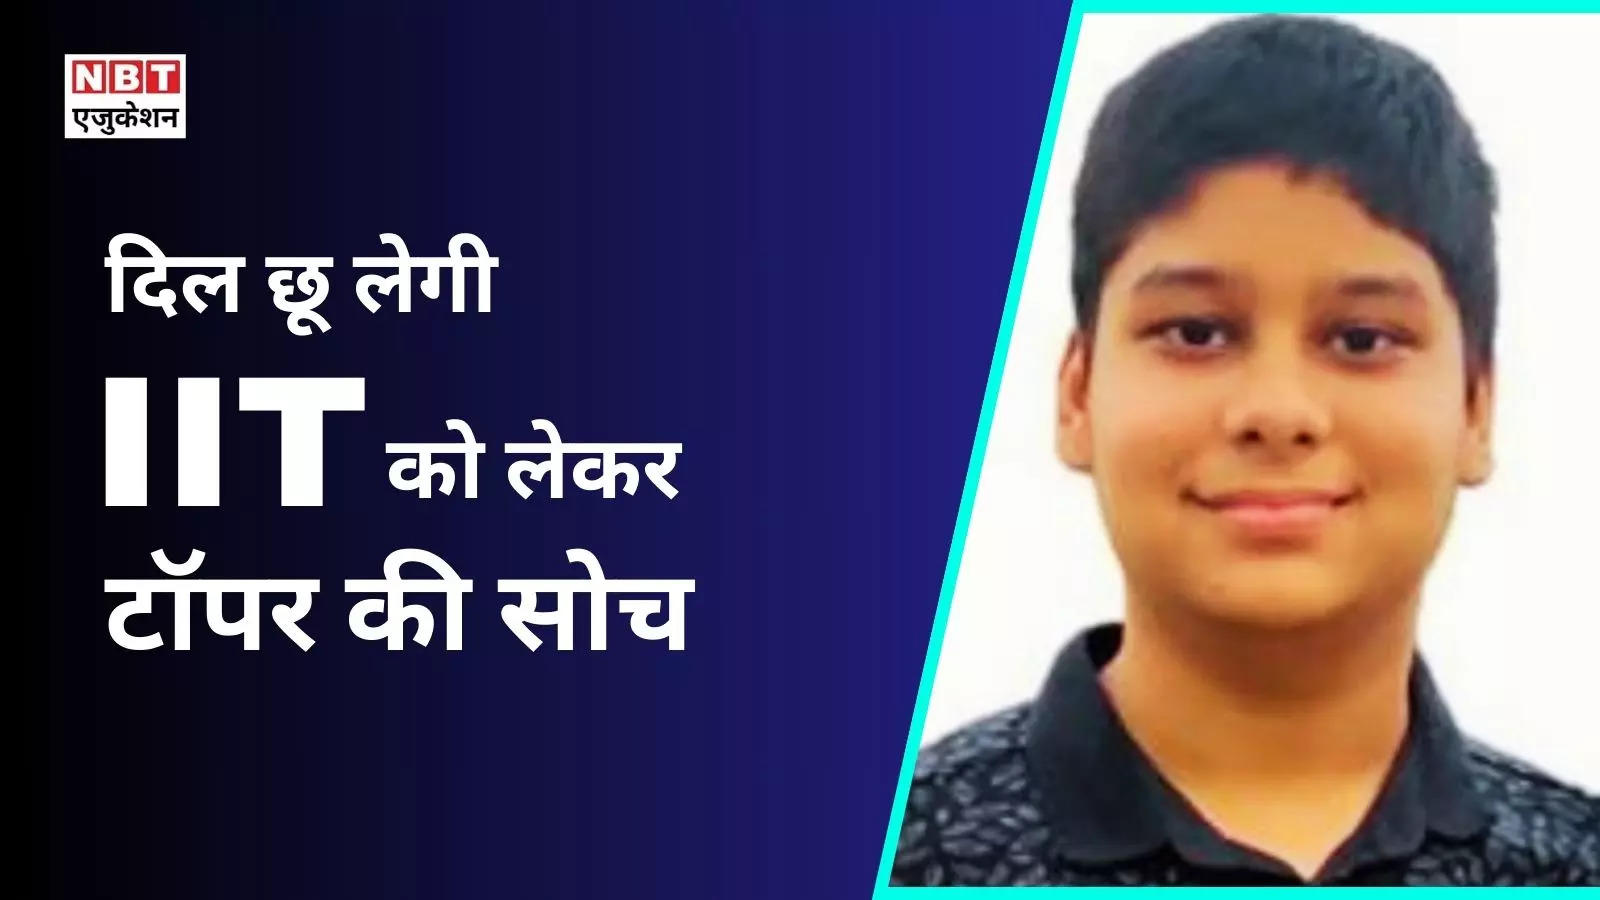 IIT topper Ved Lahoti said such a big thing that you will also say- 'Wow son, everyone should learn this'